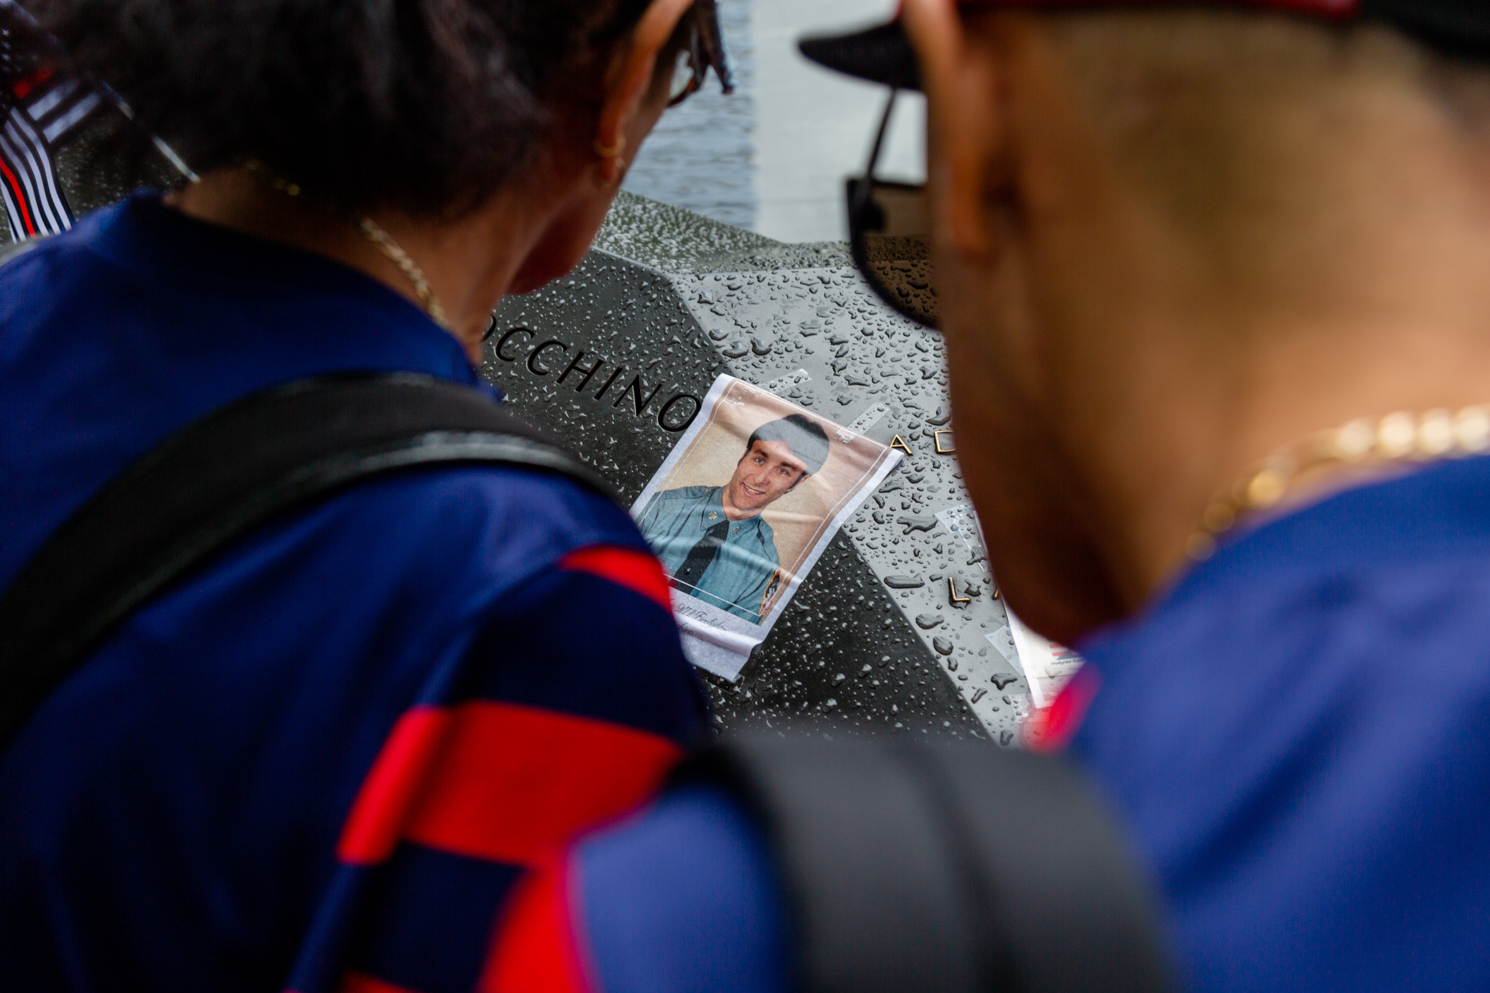 Visitors look at a photograph placed next to the engraved names at the Sept. 11 memorial.